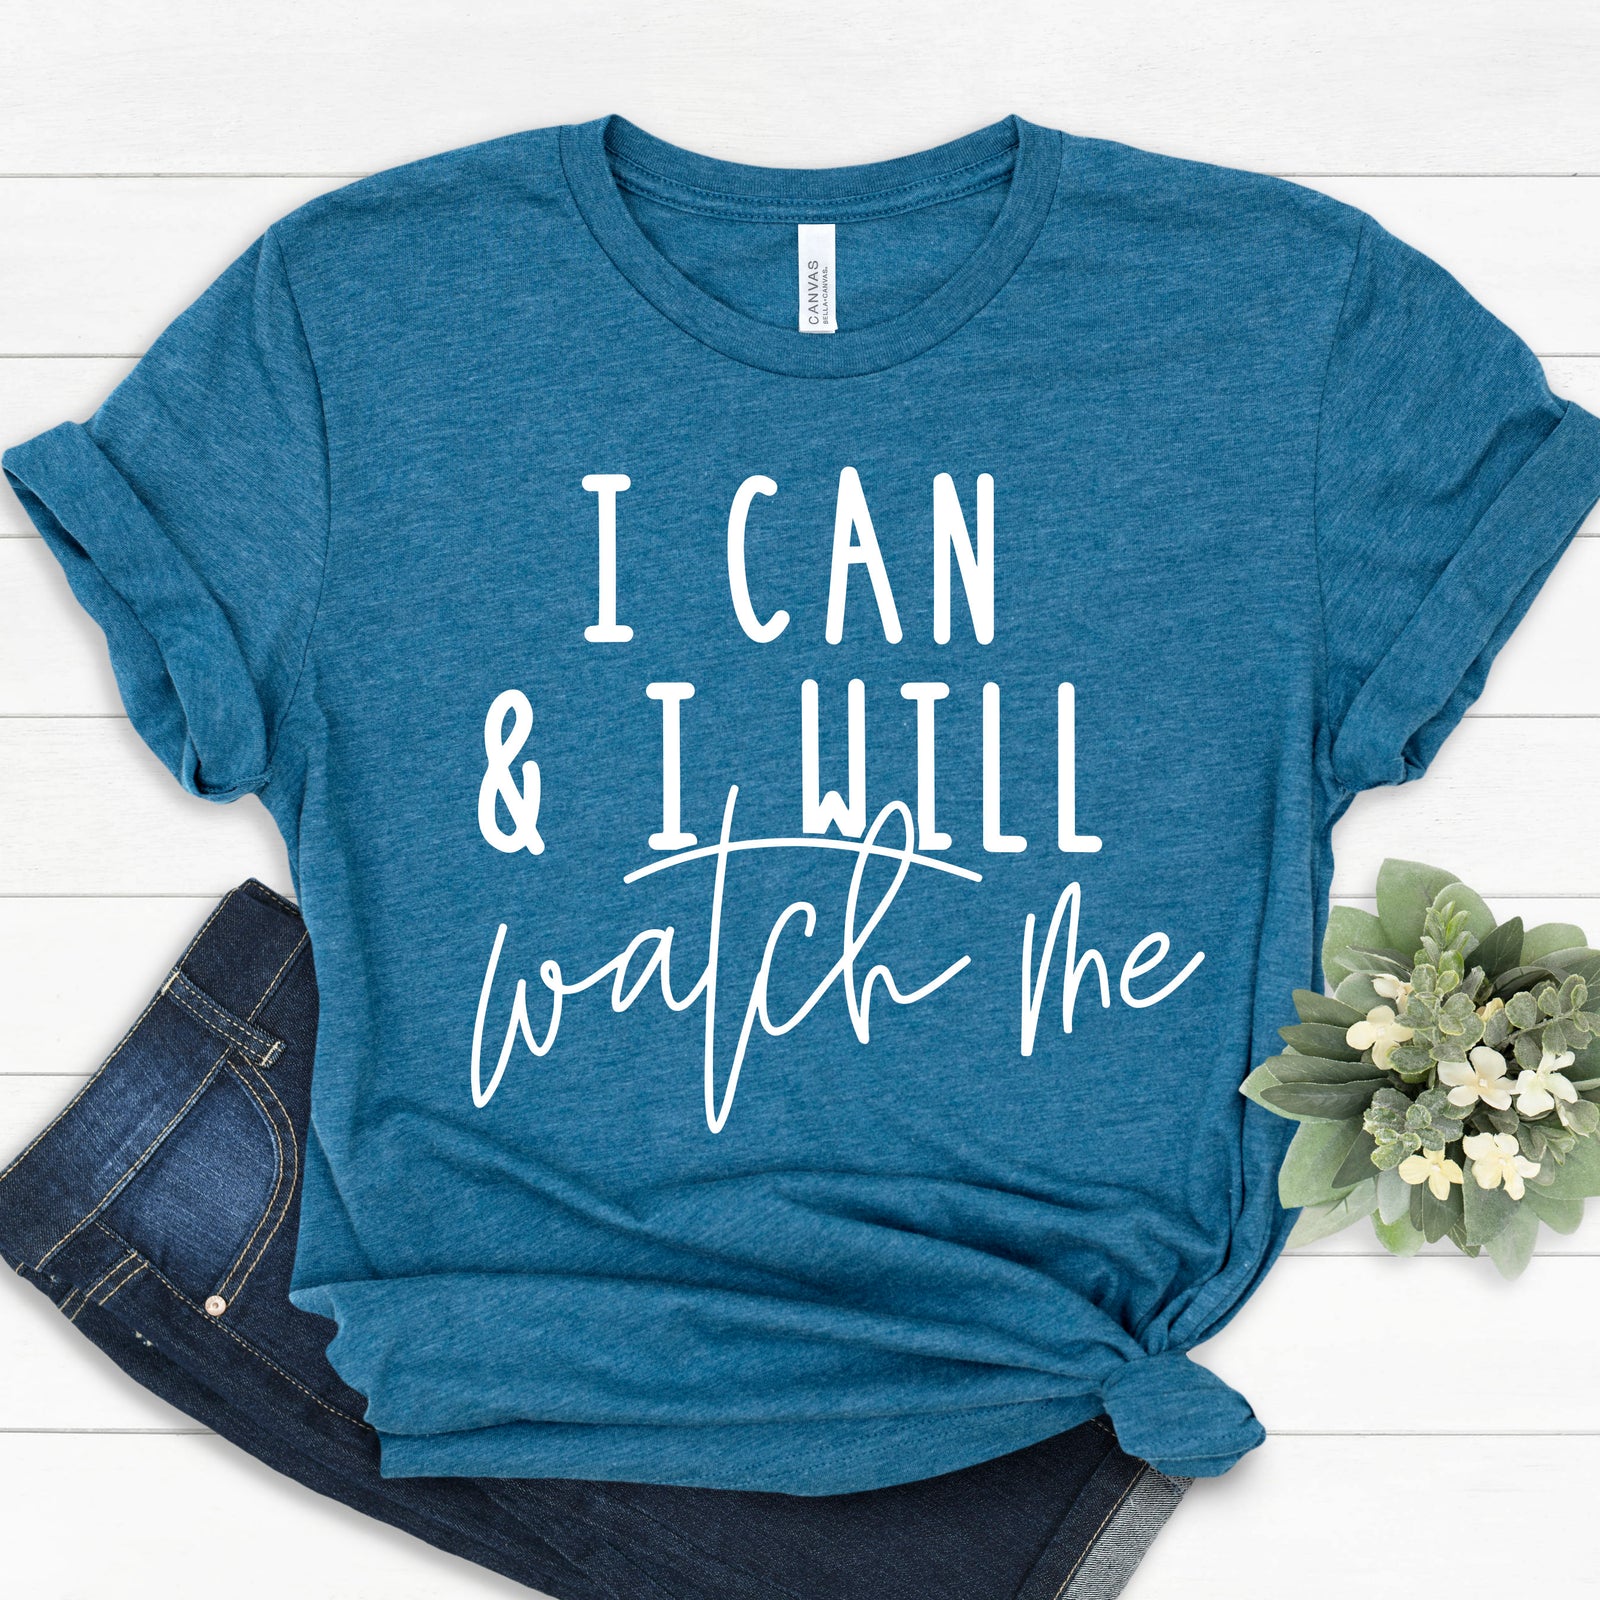 I Can I Will Watch Me - Adult Unisex T Shirt  - Motivational - Inspirational